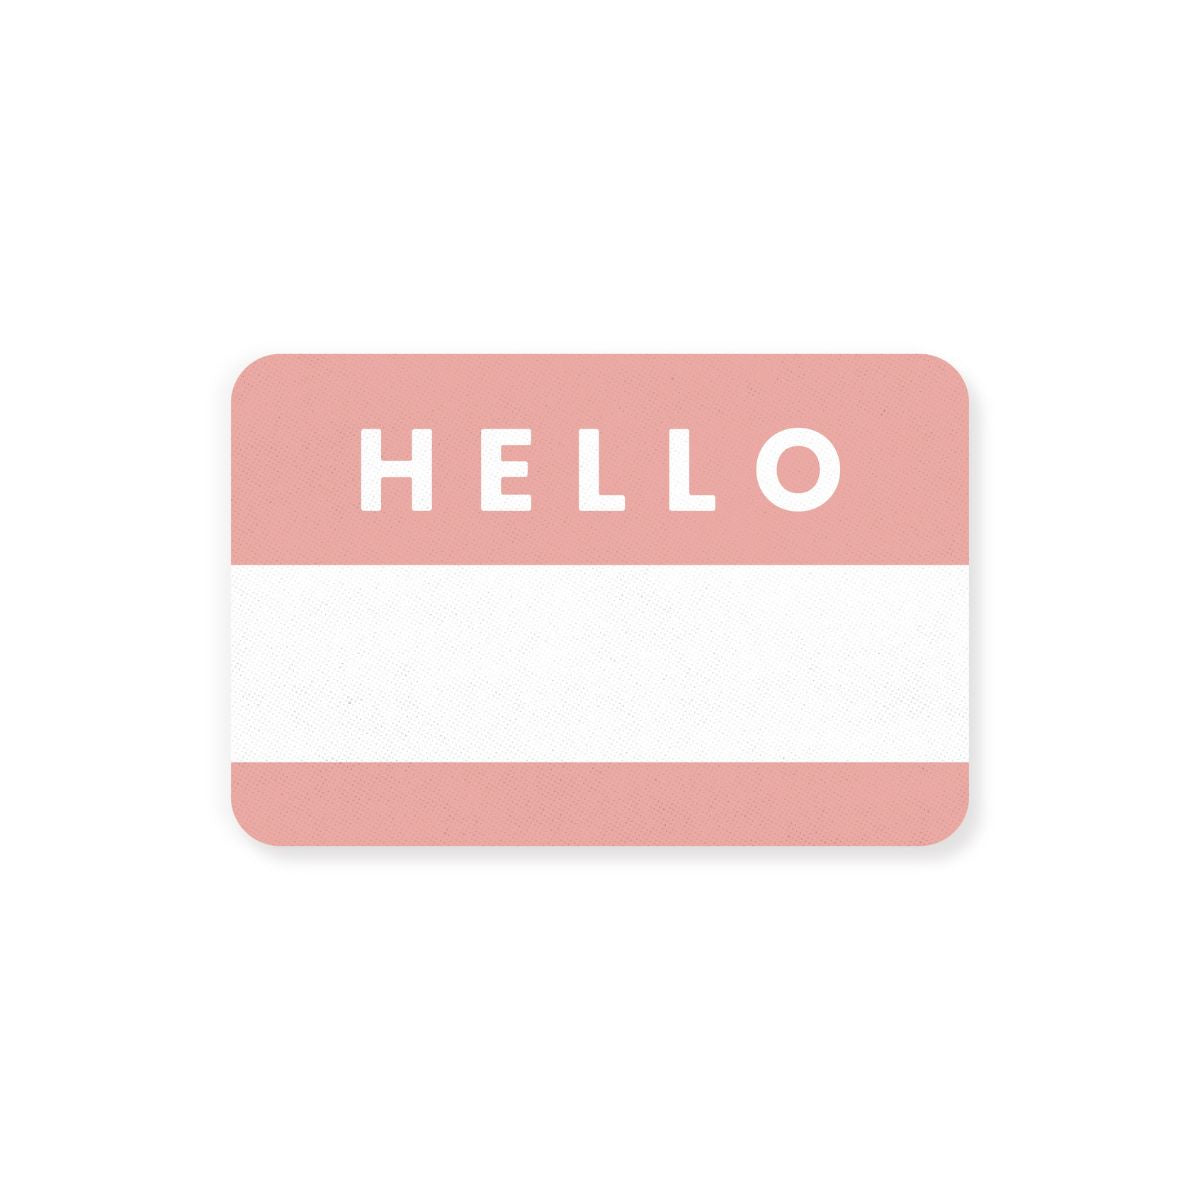 Baby Cubby Hello Sticker - Bold Font - Dusty Pink / White